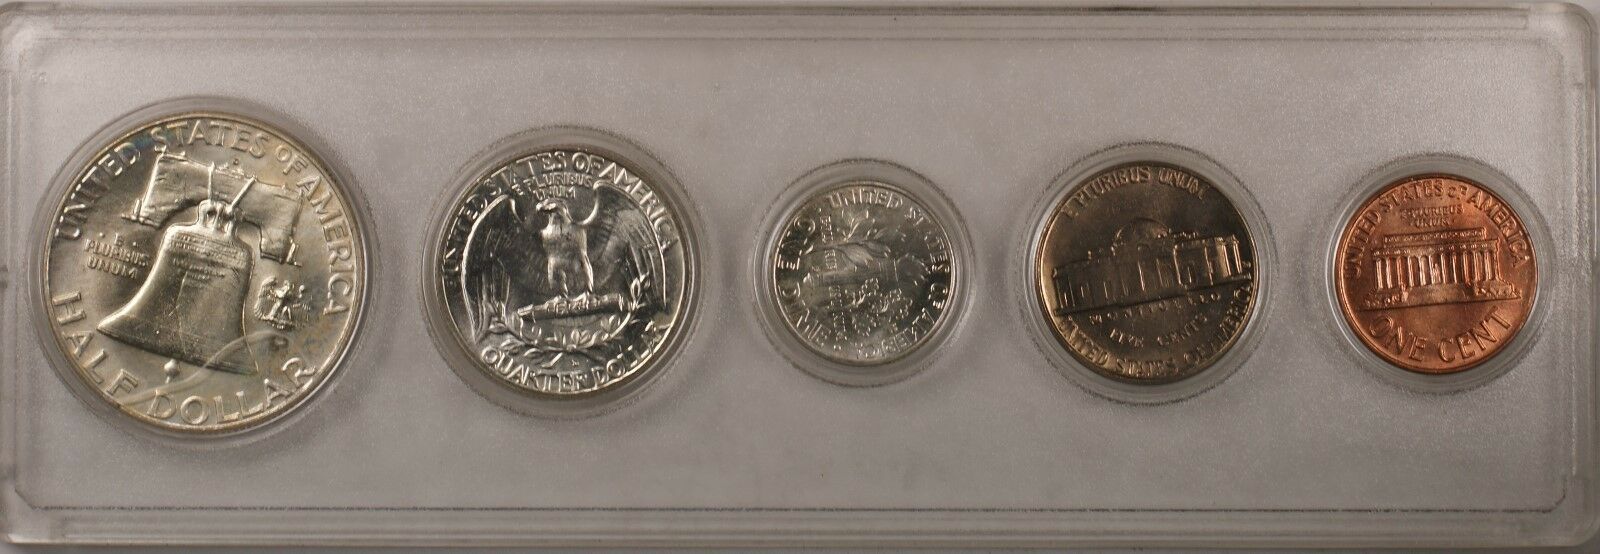 1963 D US Uncirculated Year Set with Silver Half Quarter and Dime 5 Coins Total